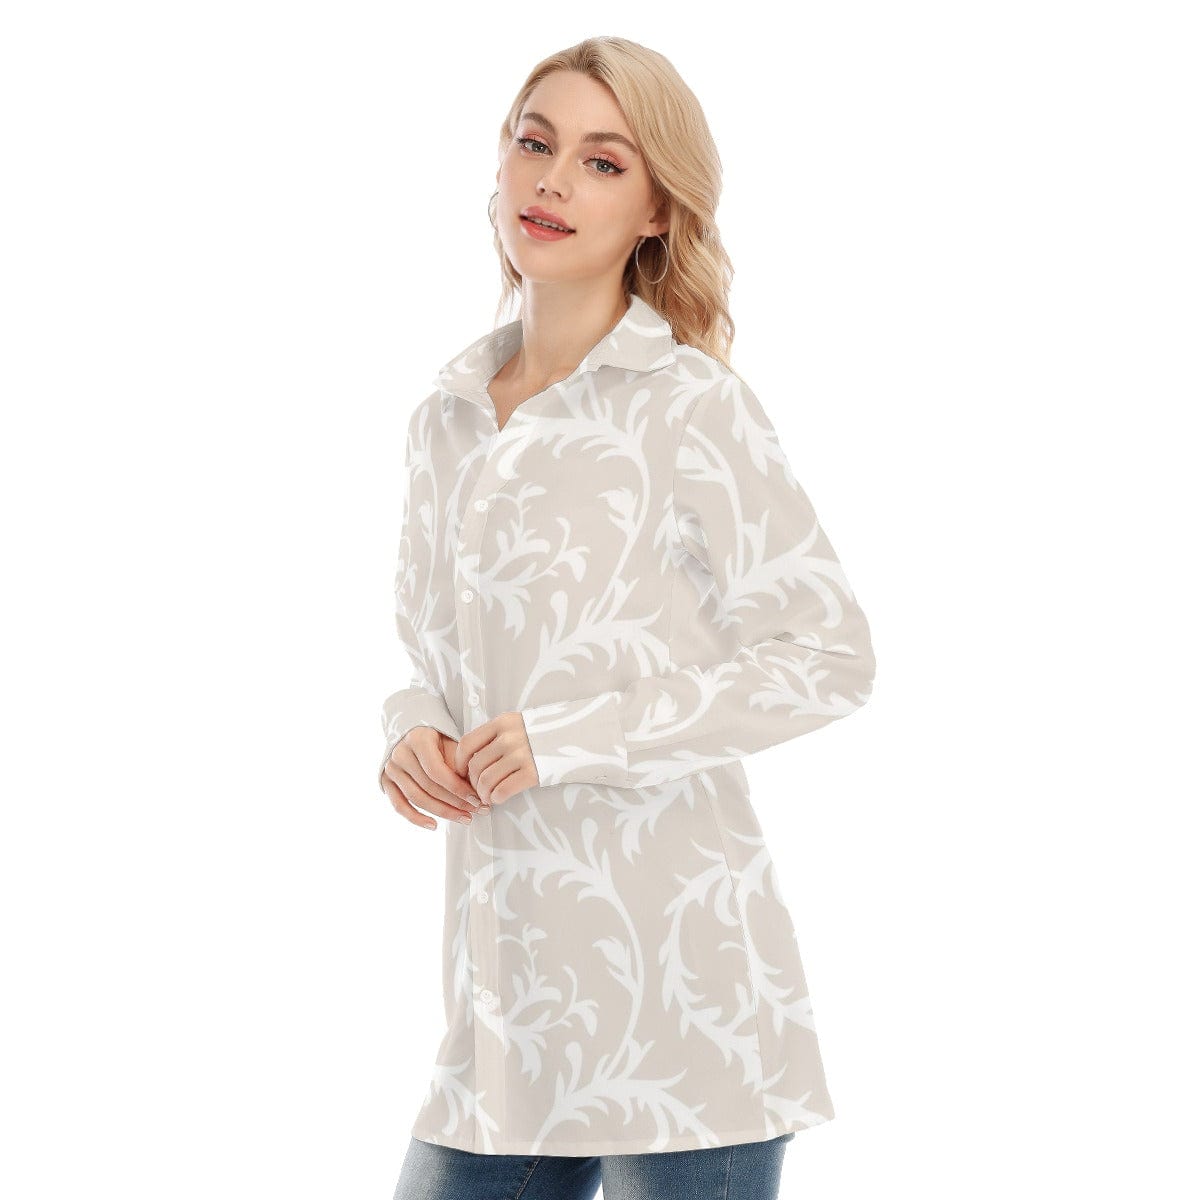 3R9FF All-Over Print Women's Long Shirt |115GSM 98% Cotton and 2% spandex